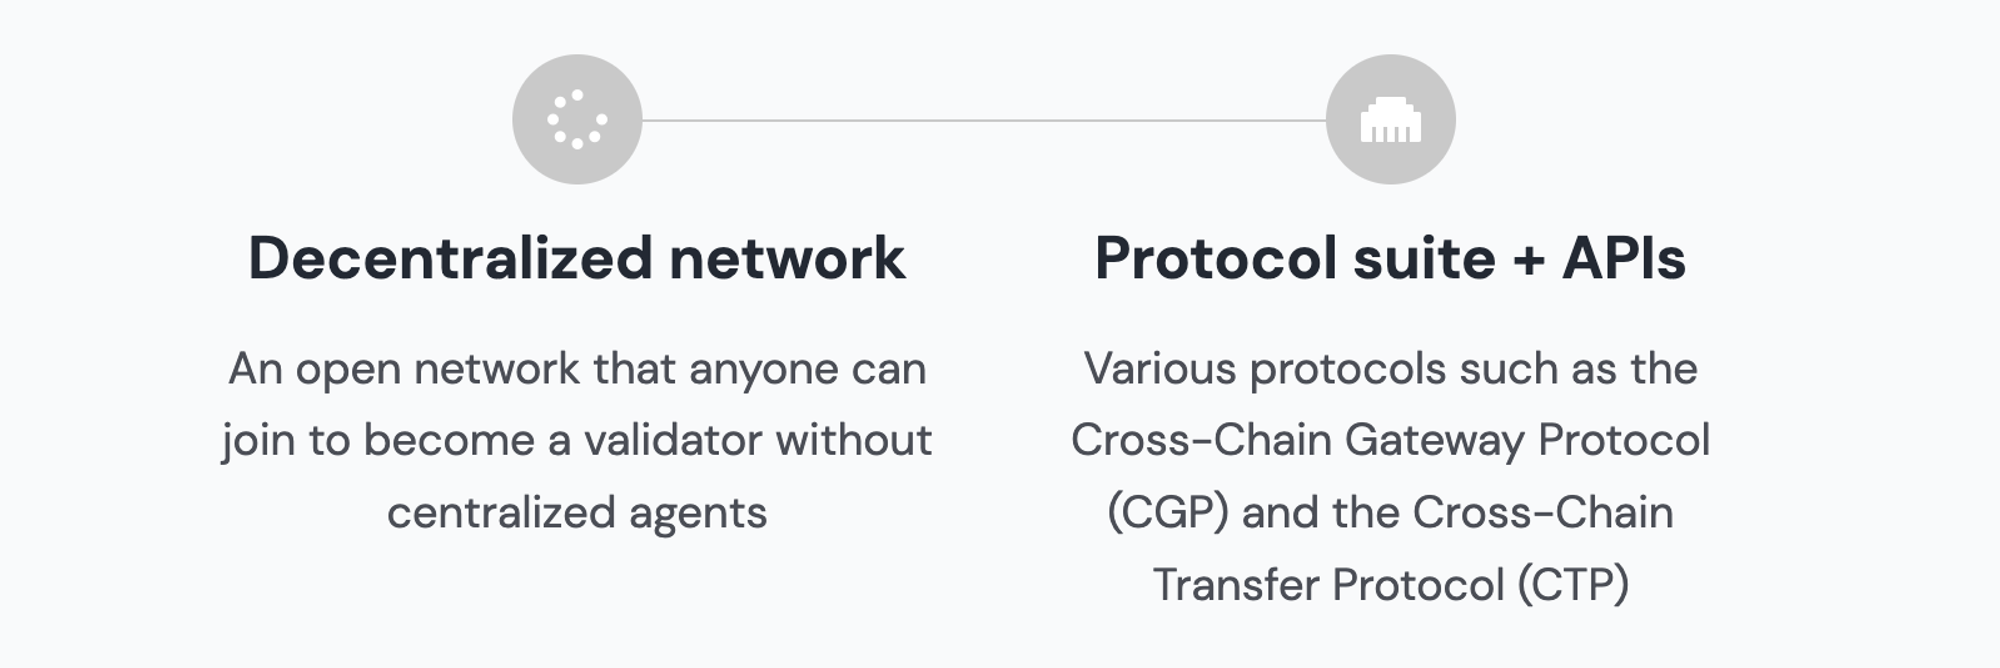 Visualization of the elements listed above. The decentralized network, and the SDKs/APIs and how they operate together. 